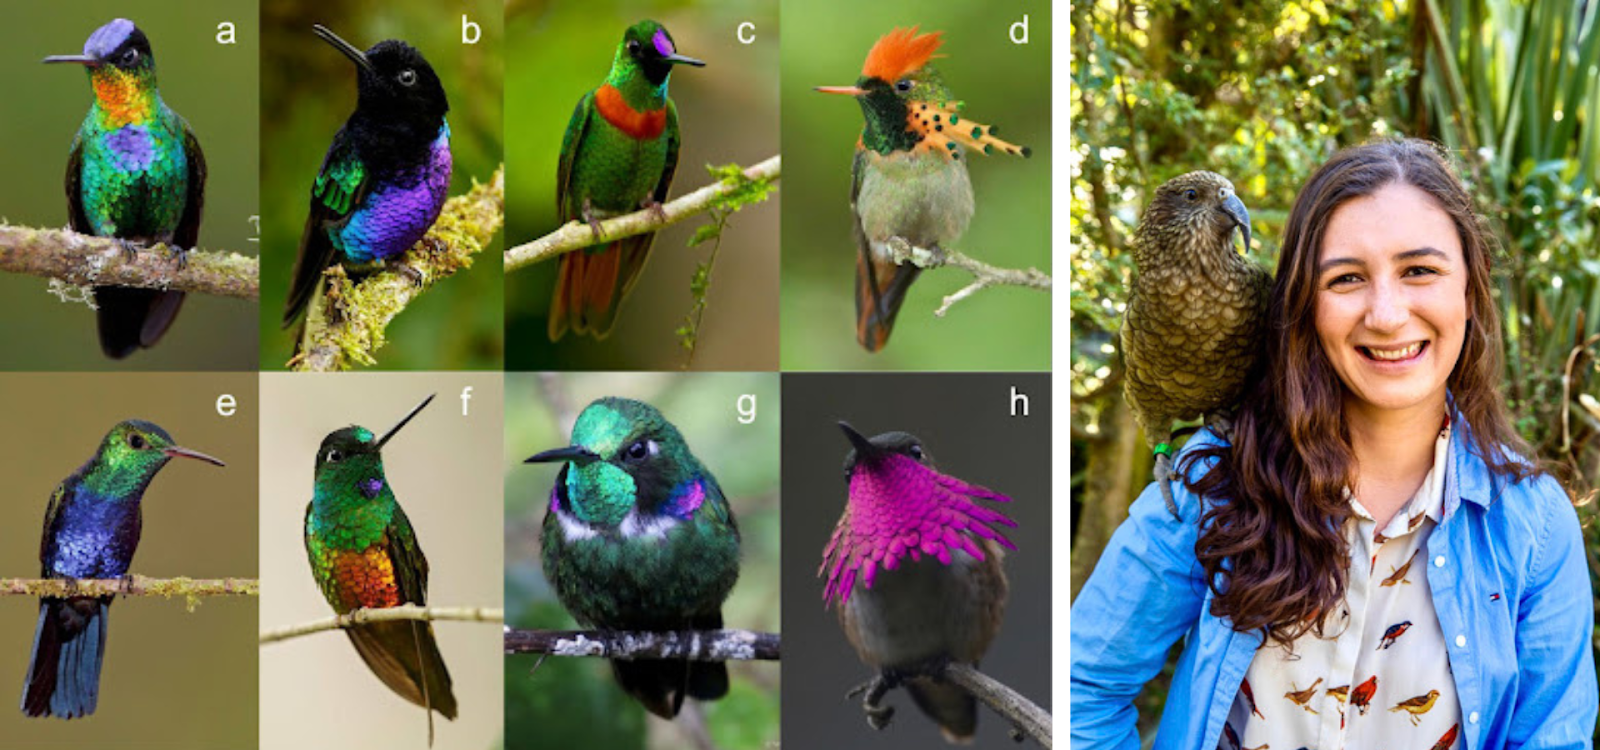 Left: Photos labeled “a” through “h” of hummingbird males of eight species. Credits: a-f: Glenn Bartley, g: Wilmer Quiceno, h: John Cahill. Right: Photo: Gabriela Venable. Credit: courtesy of Gabriela Venable